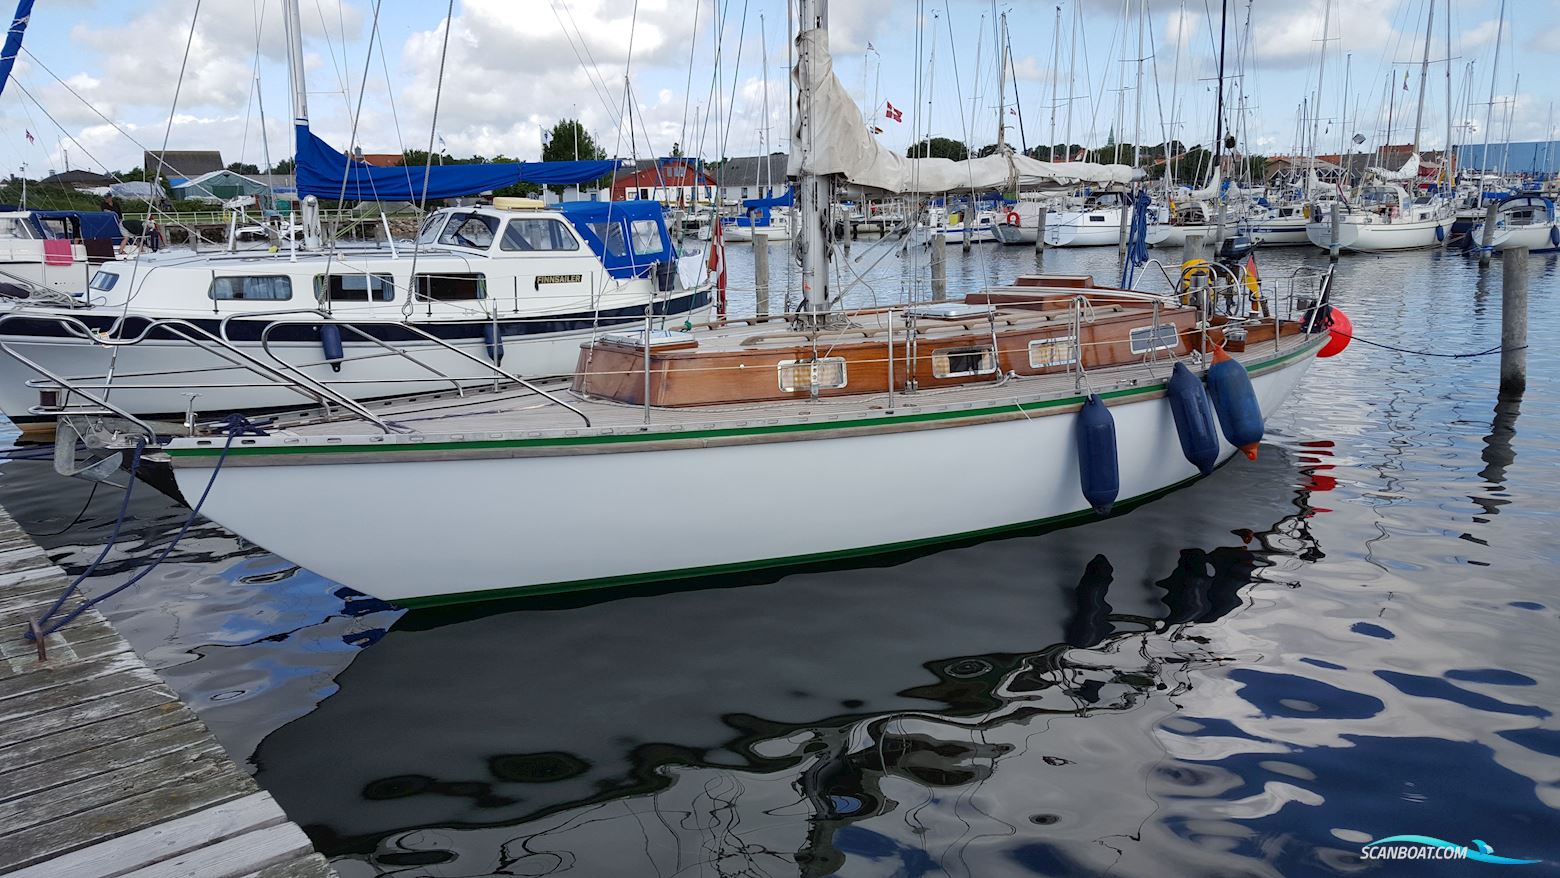 Narval 38 (One Tonner) Sailing boat 1975, with Volvo Penta MD 17 engine, Germany